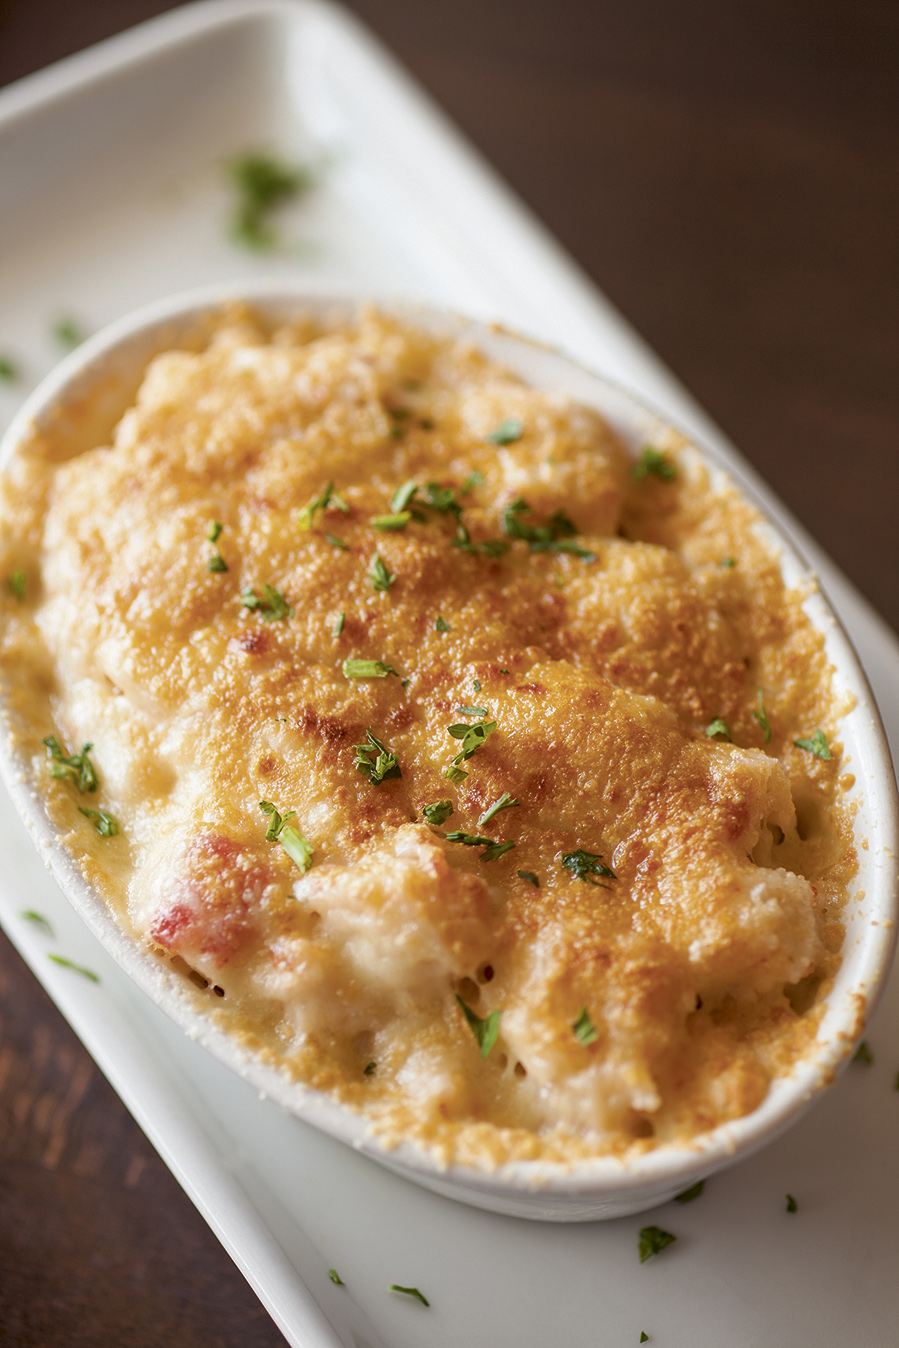 Raclette Mac and cheese